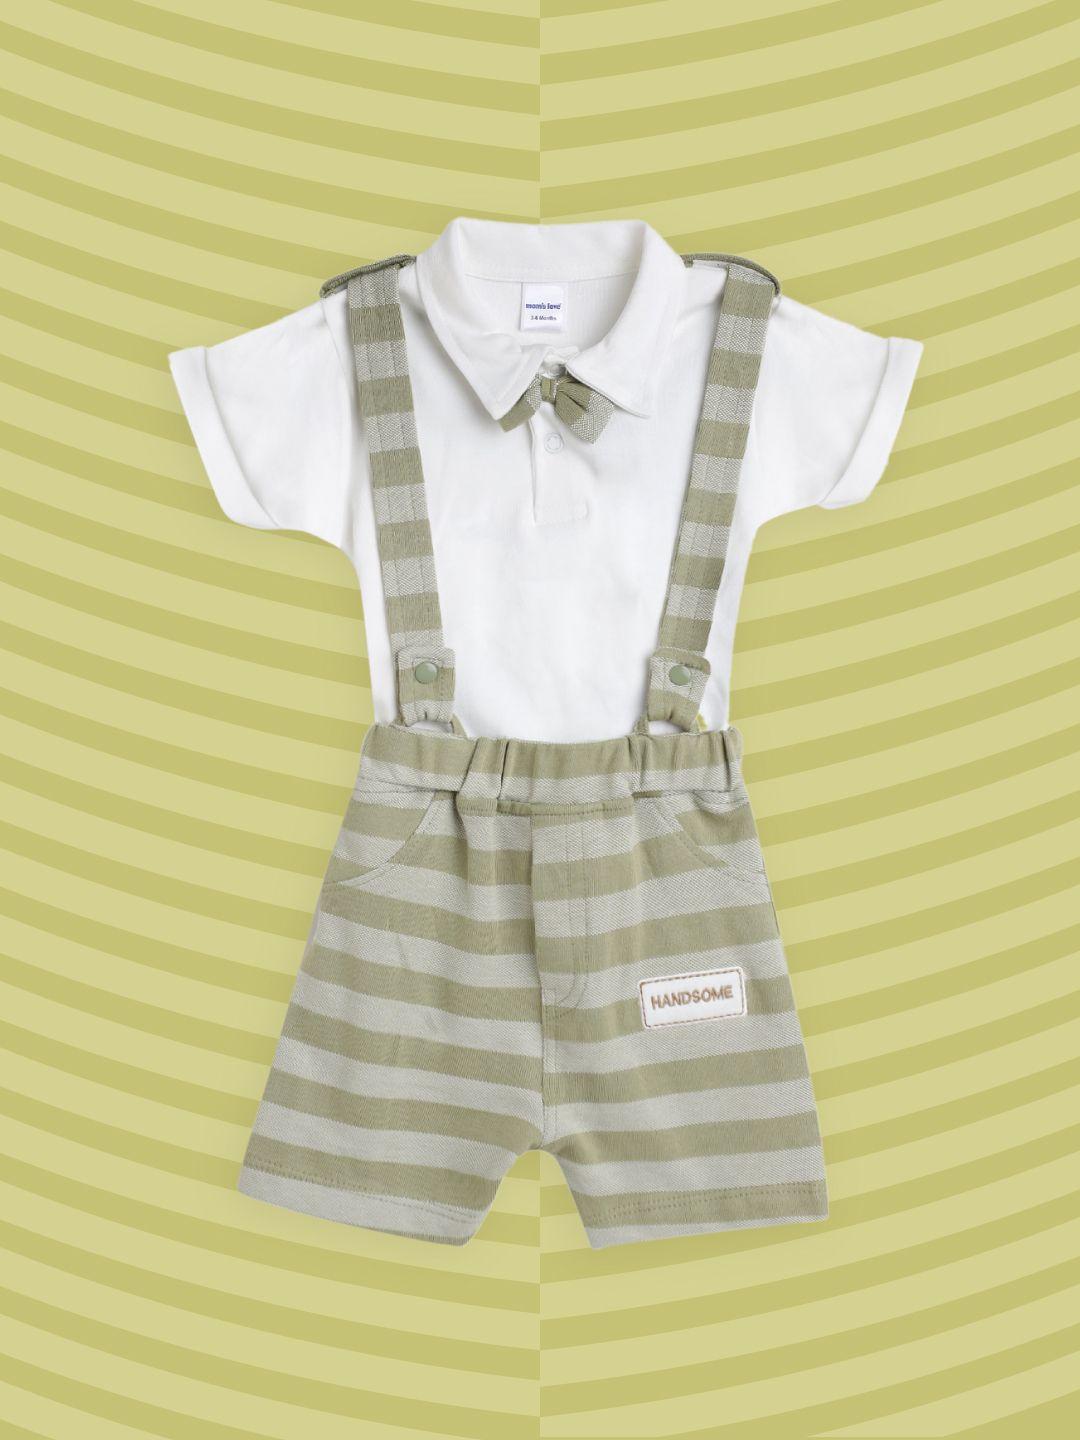 moms love infant boys white & olive green striped bow-tie applique cotton clothing set